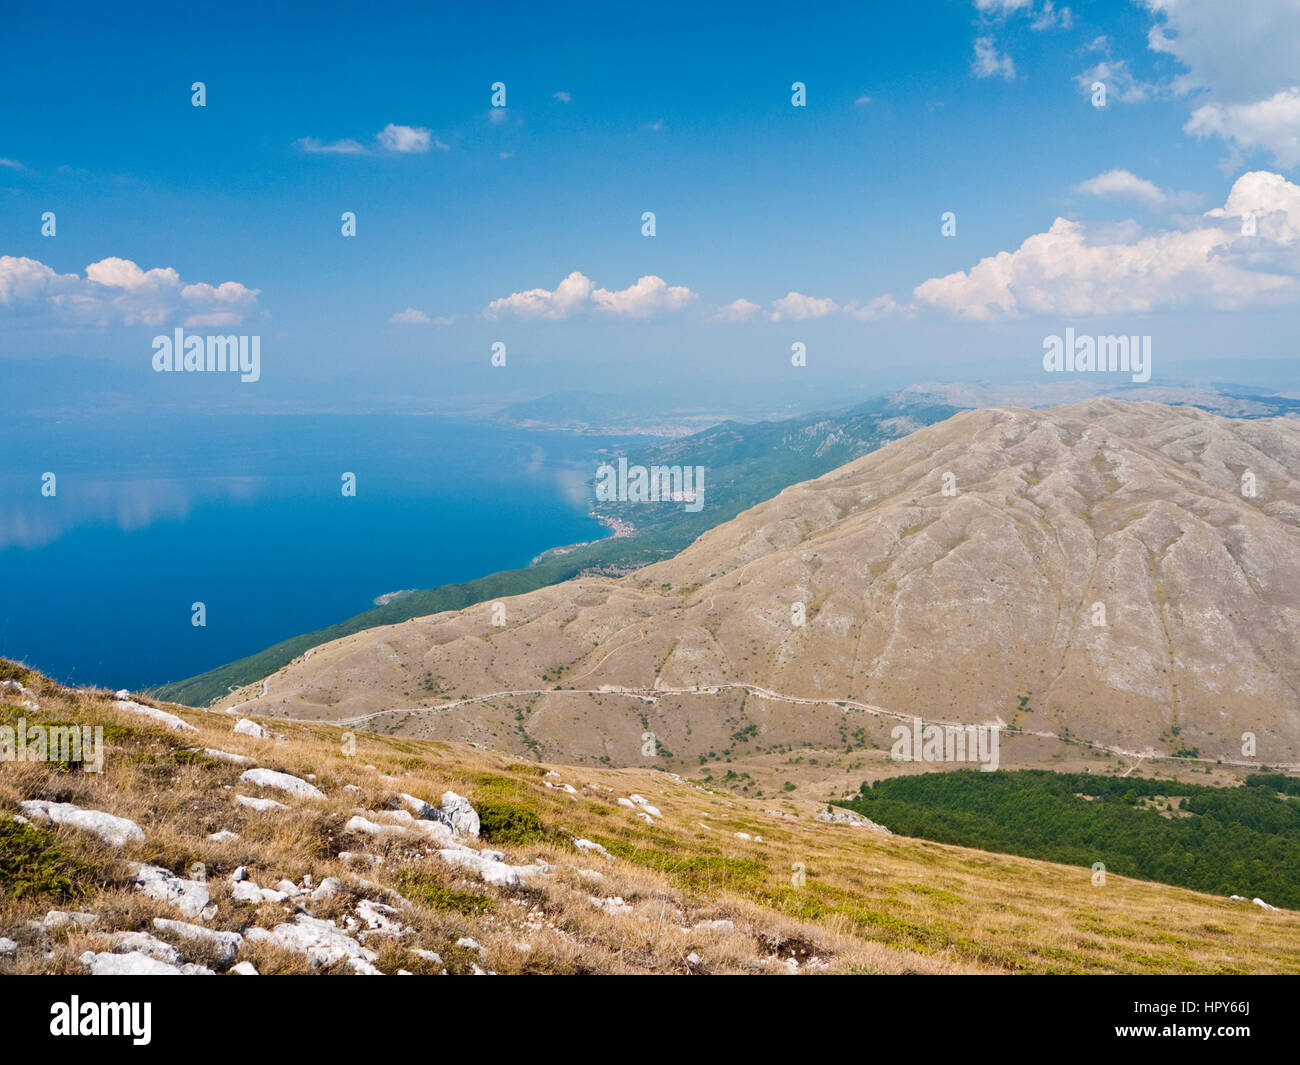 UNESCO protected lake Ohrid and the mountains of Galicica National Park, Republic of Macedonia. Stock Photo